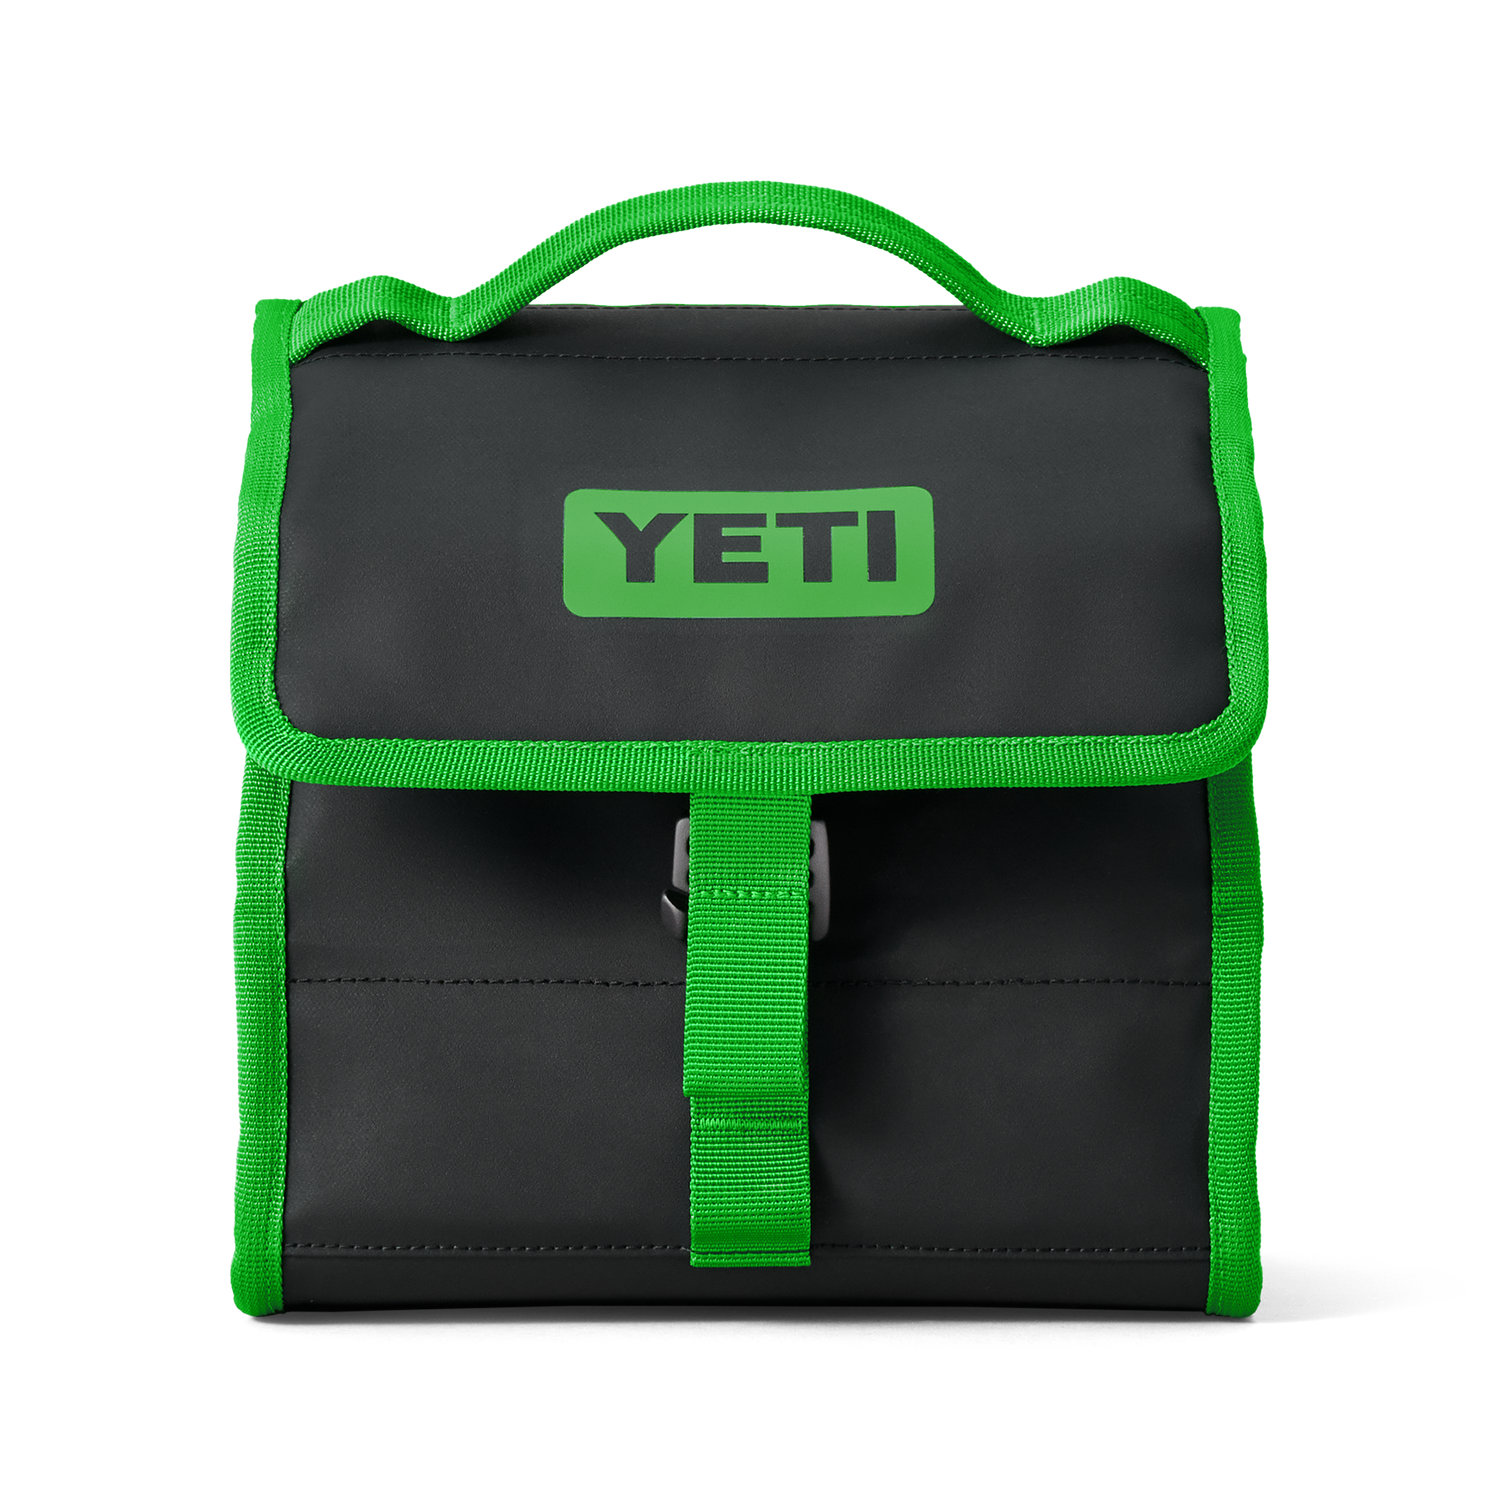 FRESH FALL COLOR  Yeti cup designs, Yeti, Green collection